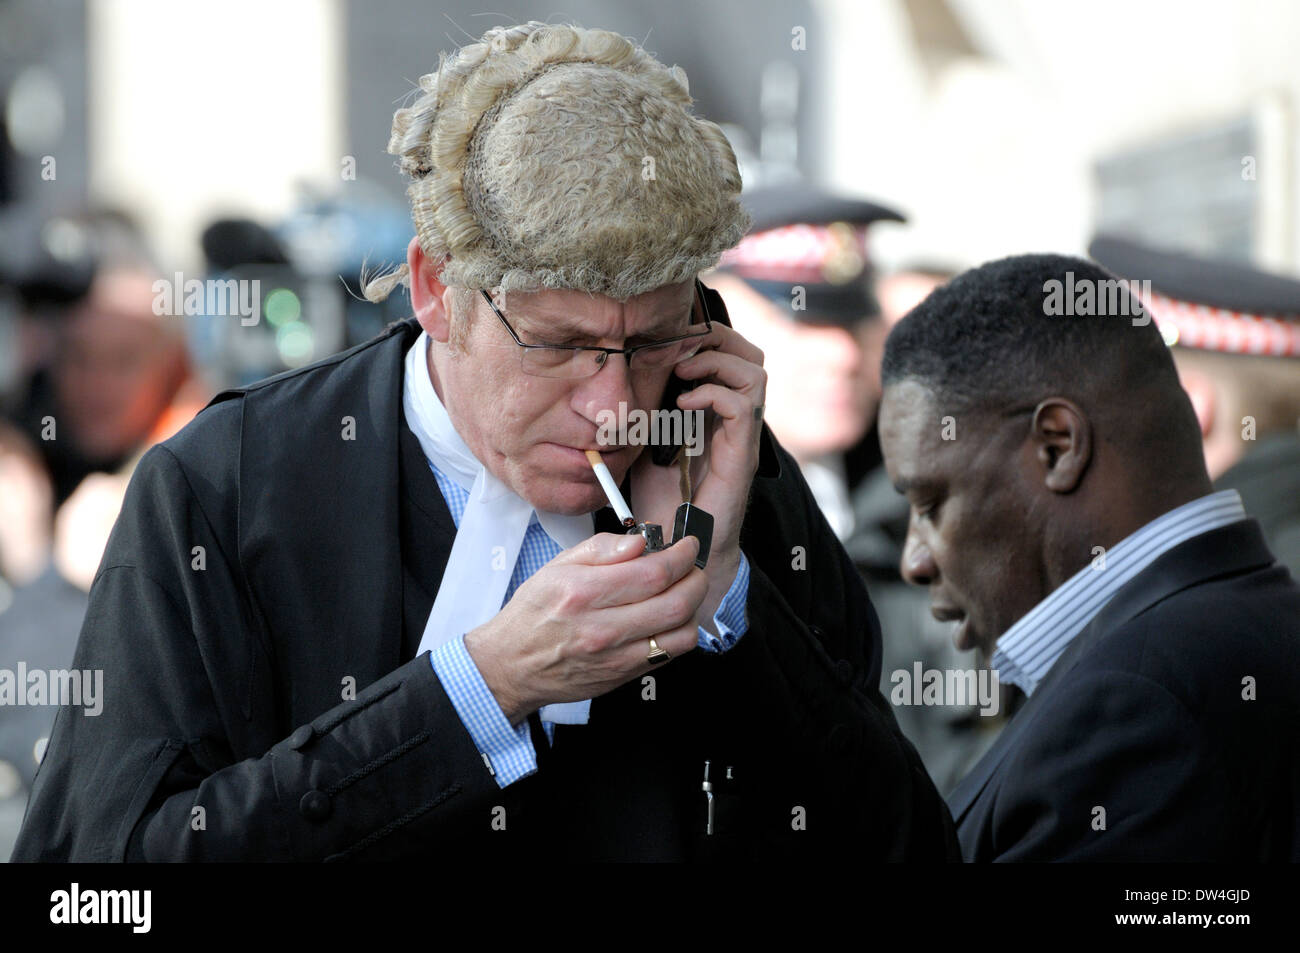 London, England, UK. Barrister outside the Old Bailey / Central Criminal Court, smoking a cigarette and on his mobile phone Stock Photo